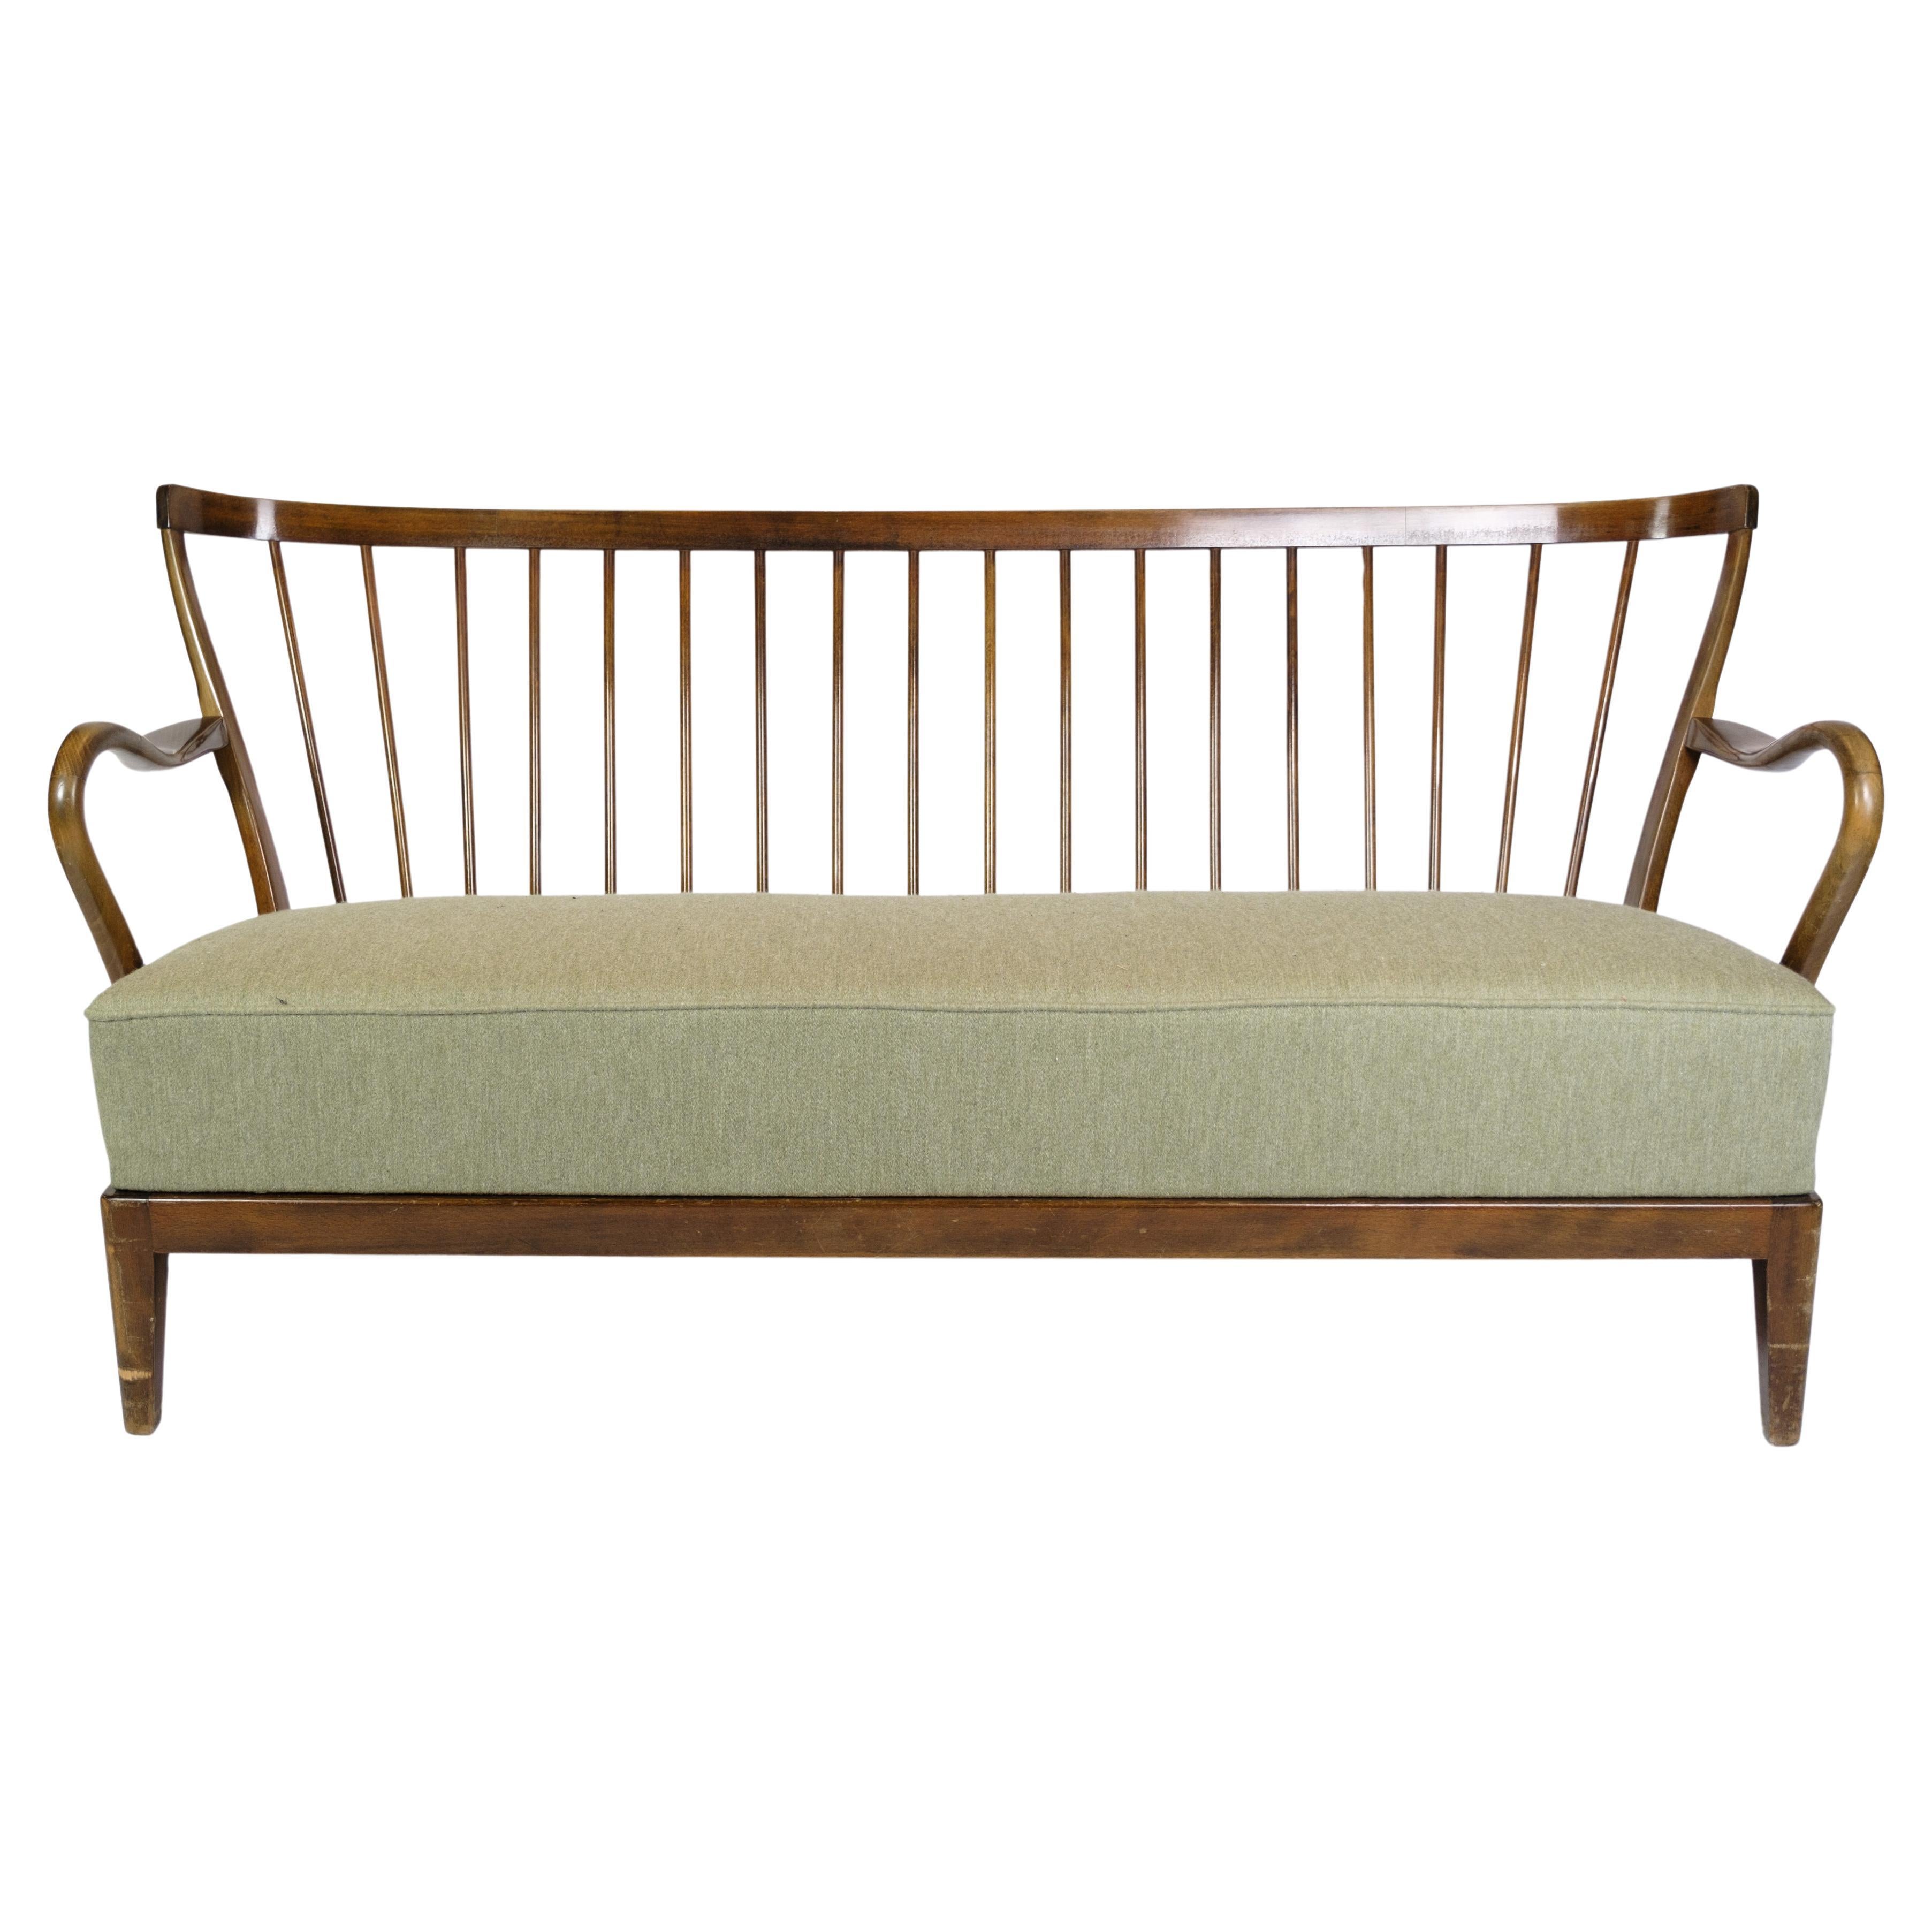 Timeless Elegance: Alfred Christiansen Designed Sofa in Green Striped Fabric, Crafted in Walnut by Slagelse Møbelfabrik circa 1950s.

Embrace the legacy of mid-20th-century furniture craftsmanship with this stunning sofa designed by Alfred